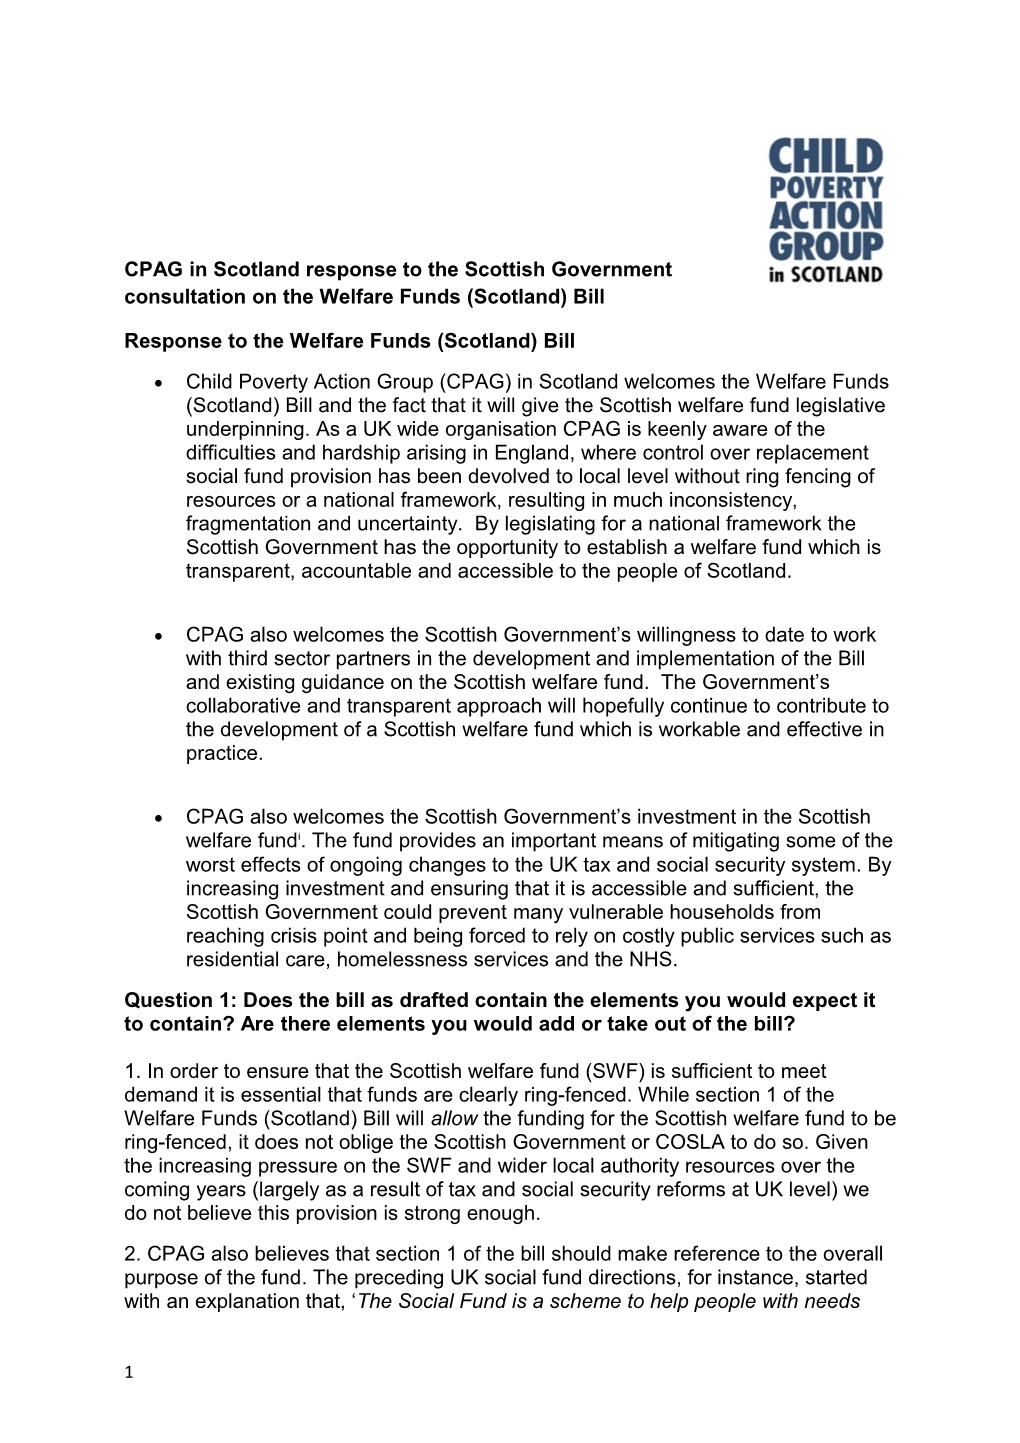 Response to the Welfare Funds (Scotland) Bill